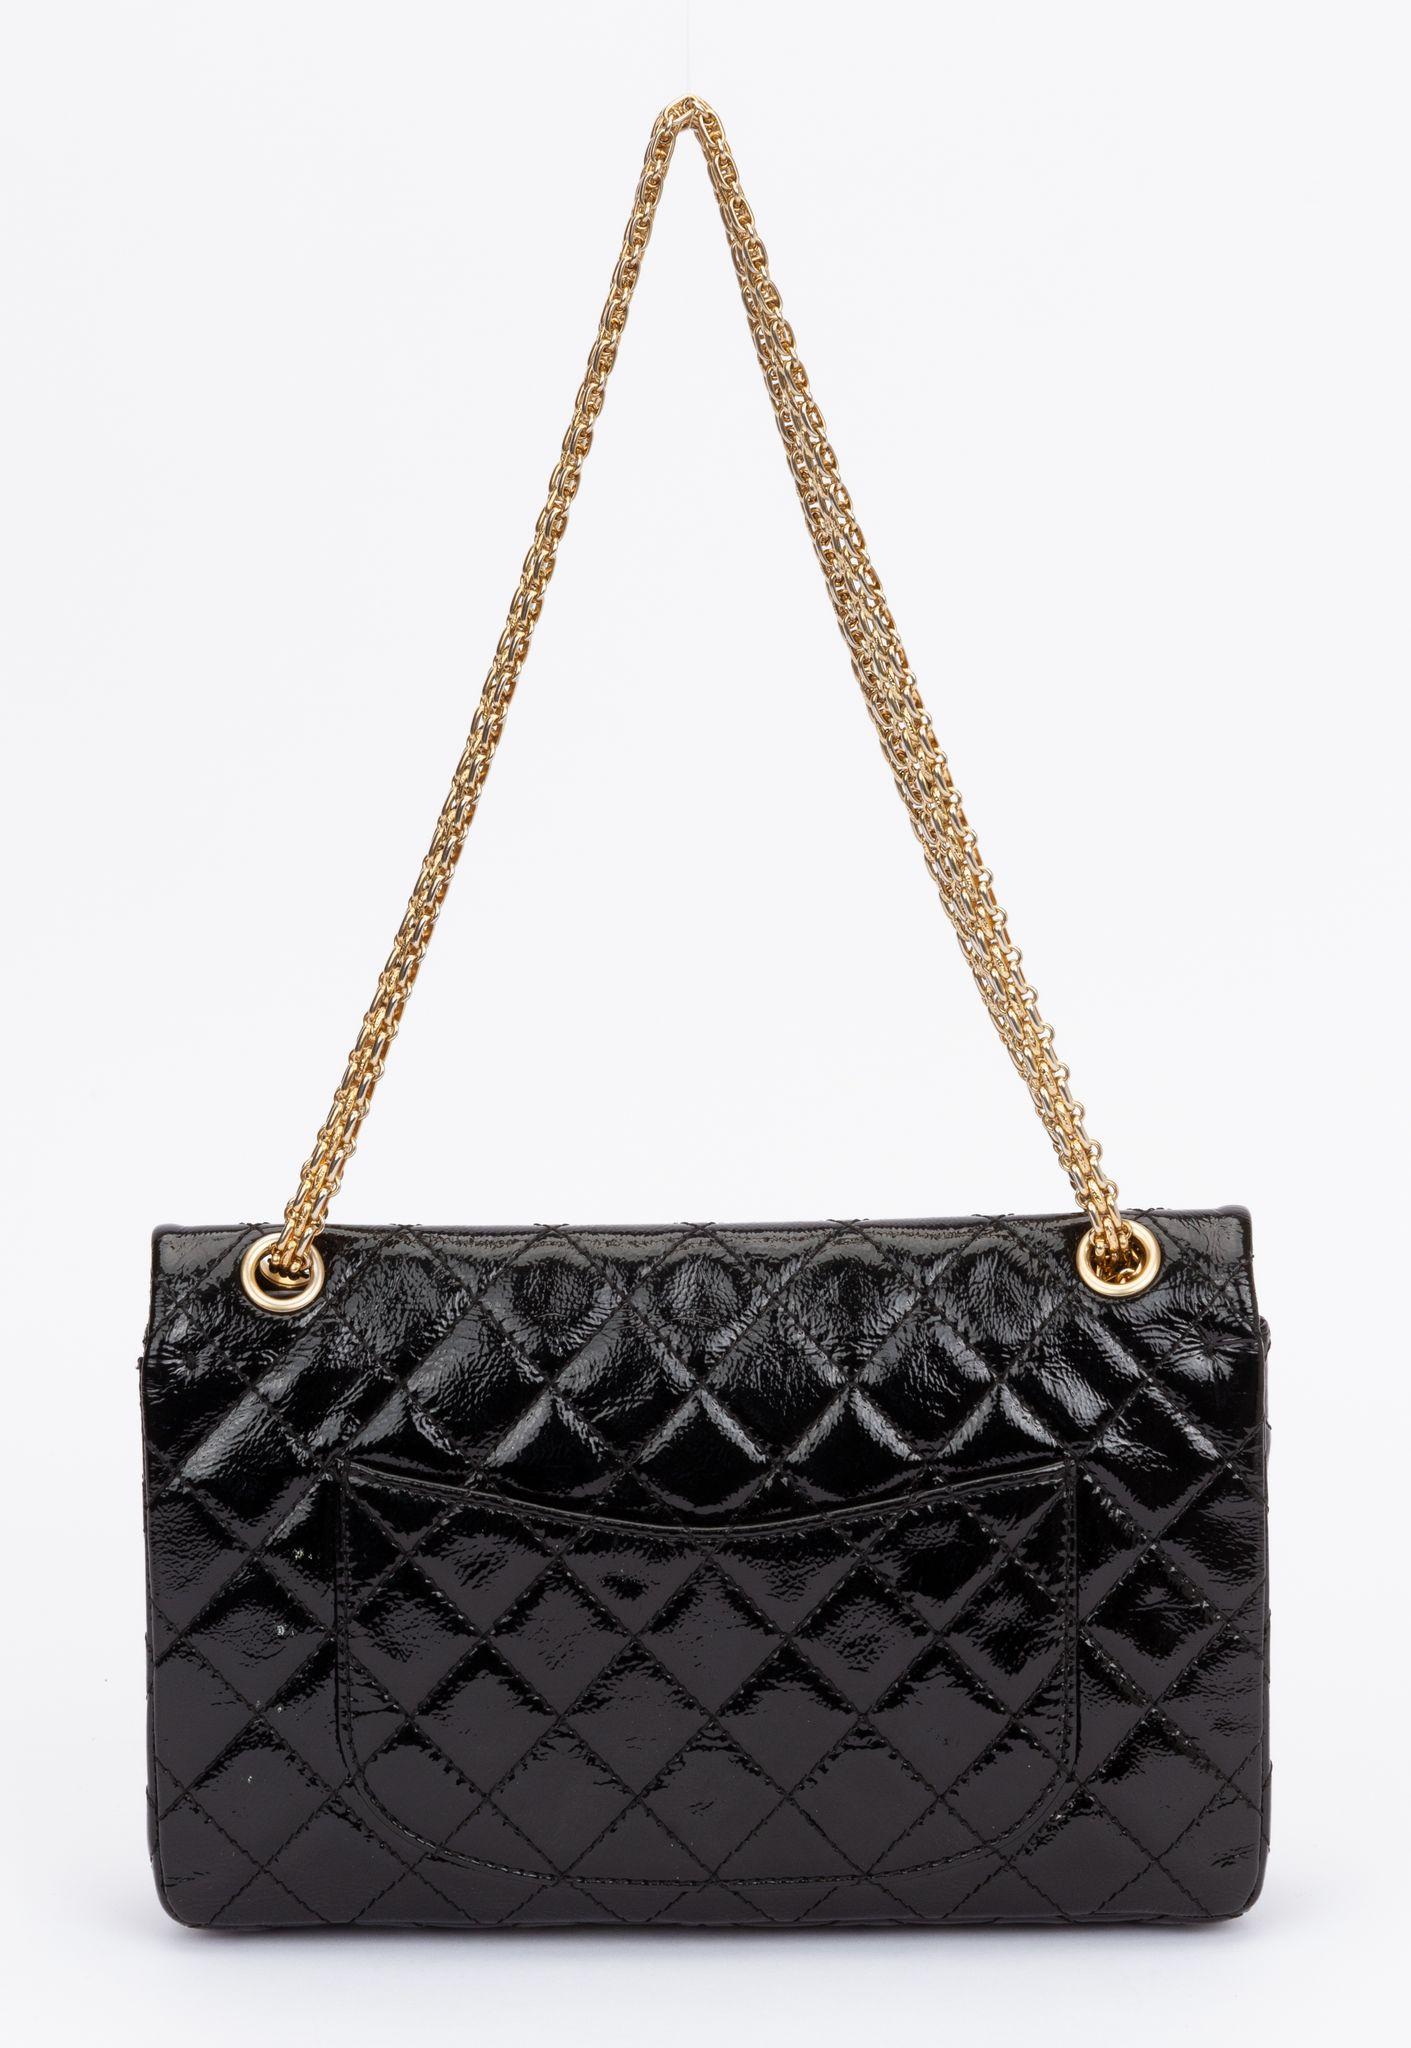 Chanel Black Patent Reissue Medium Flap In Good Condition For Sale In West Hollywood, CA